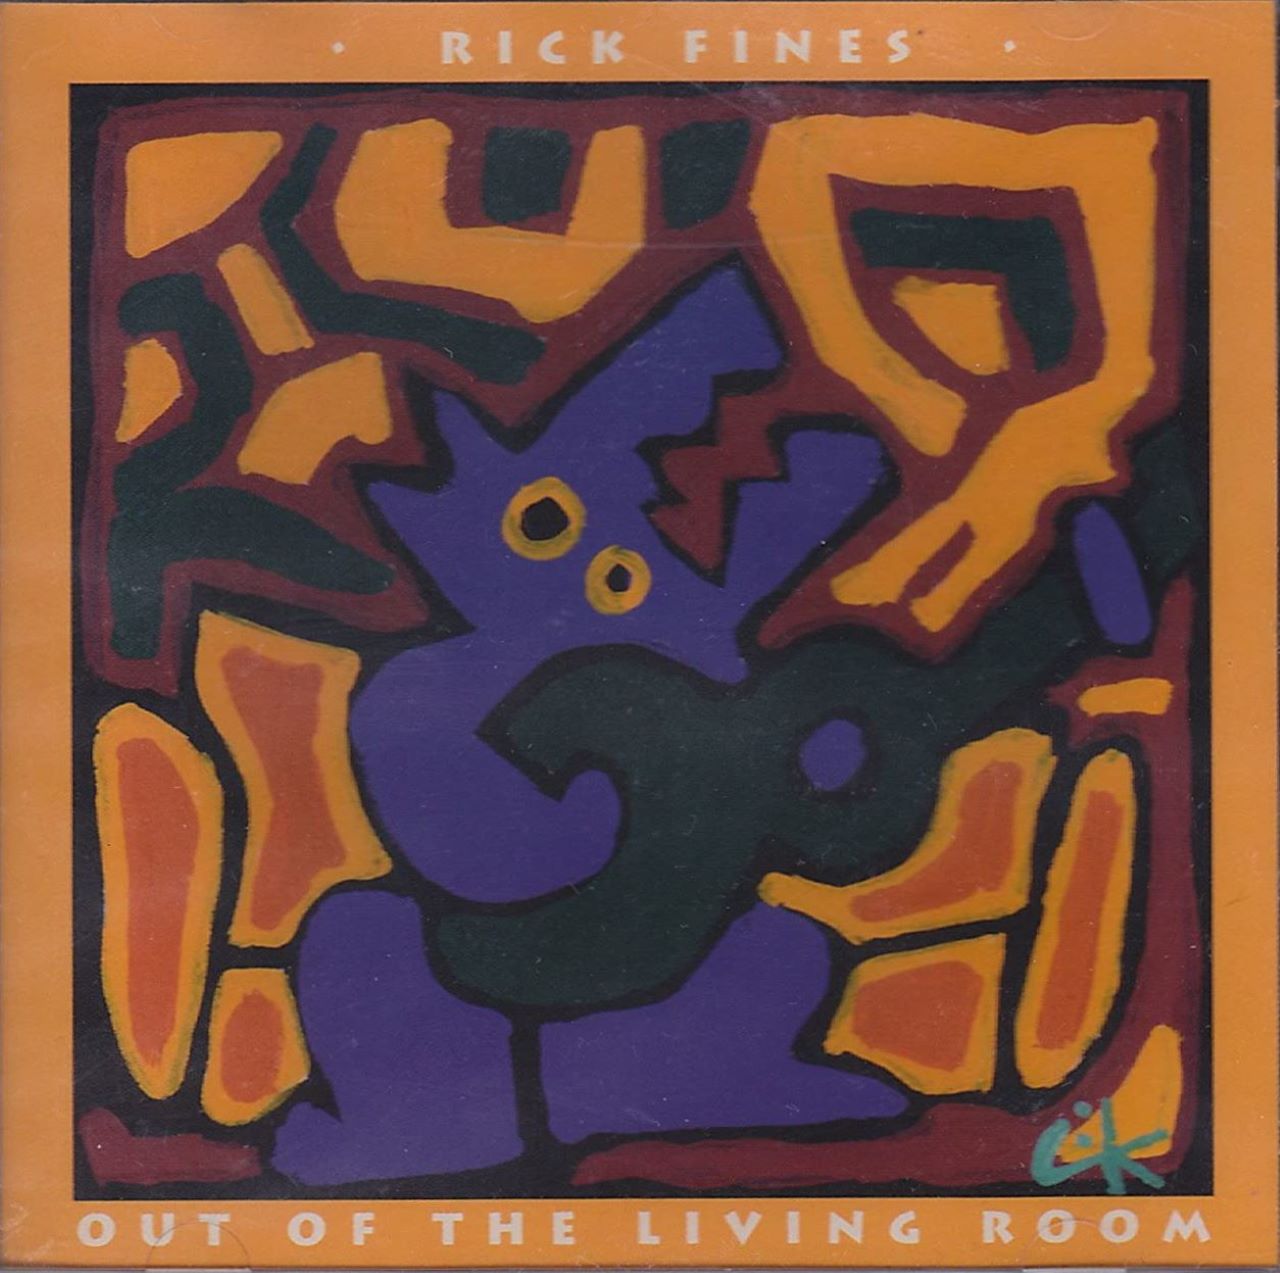 Rick Fines - Out Of The Living Room cover album